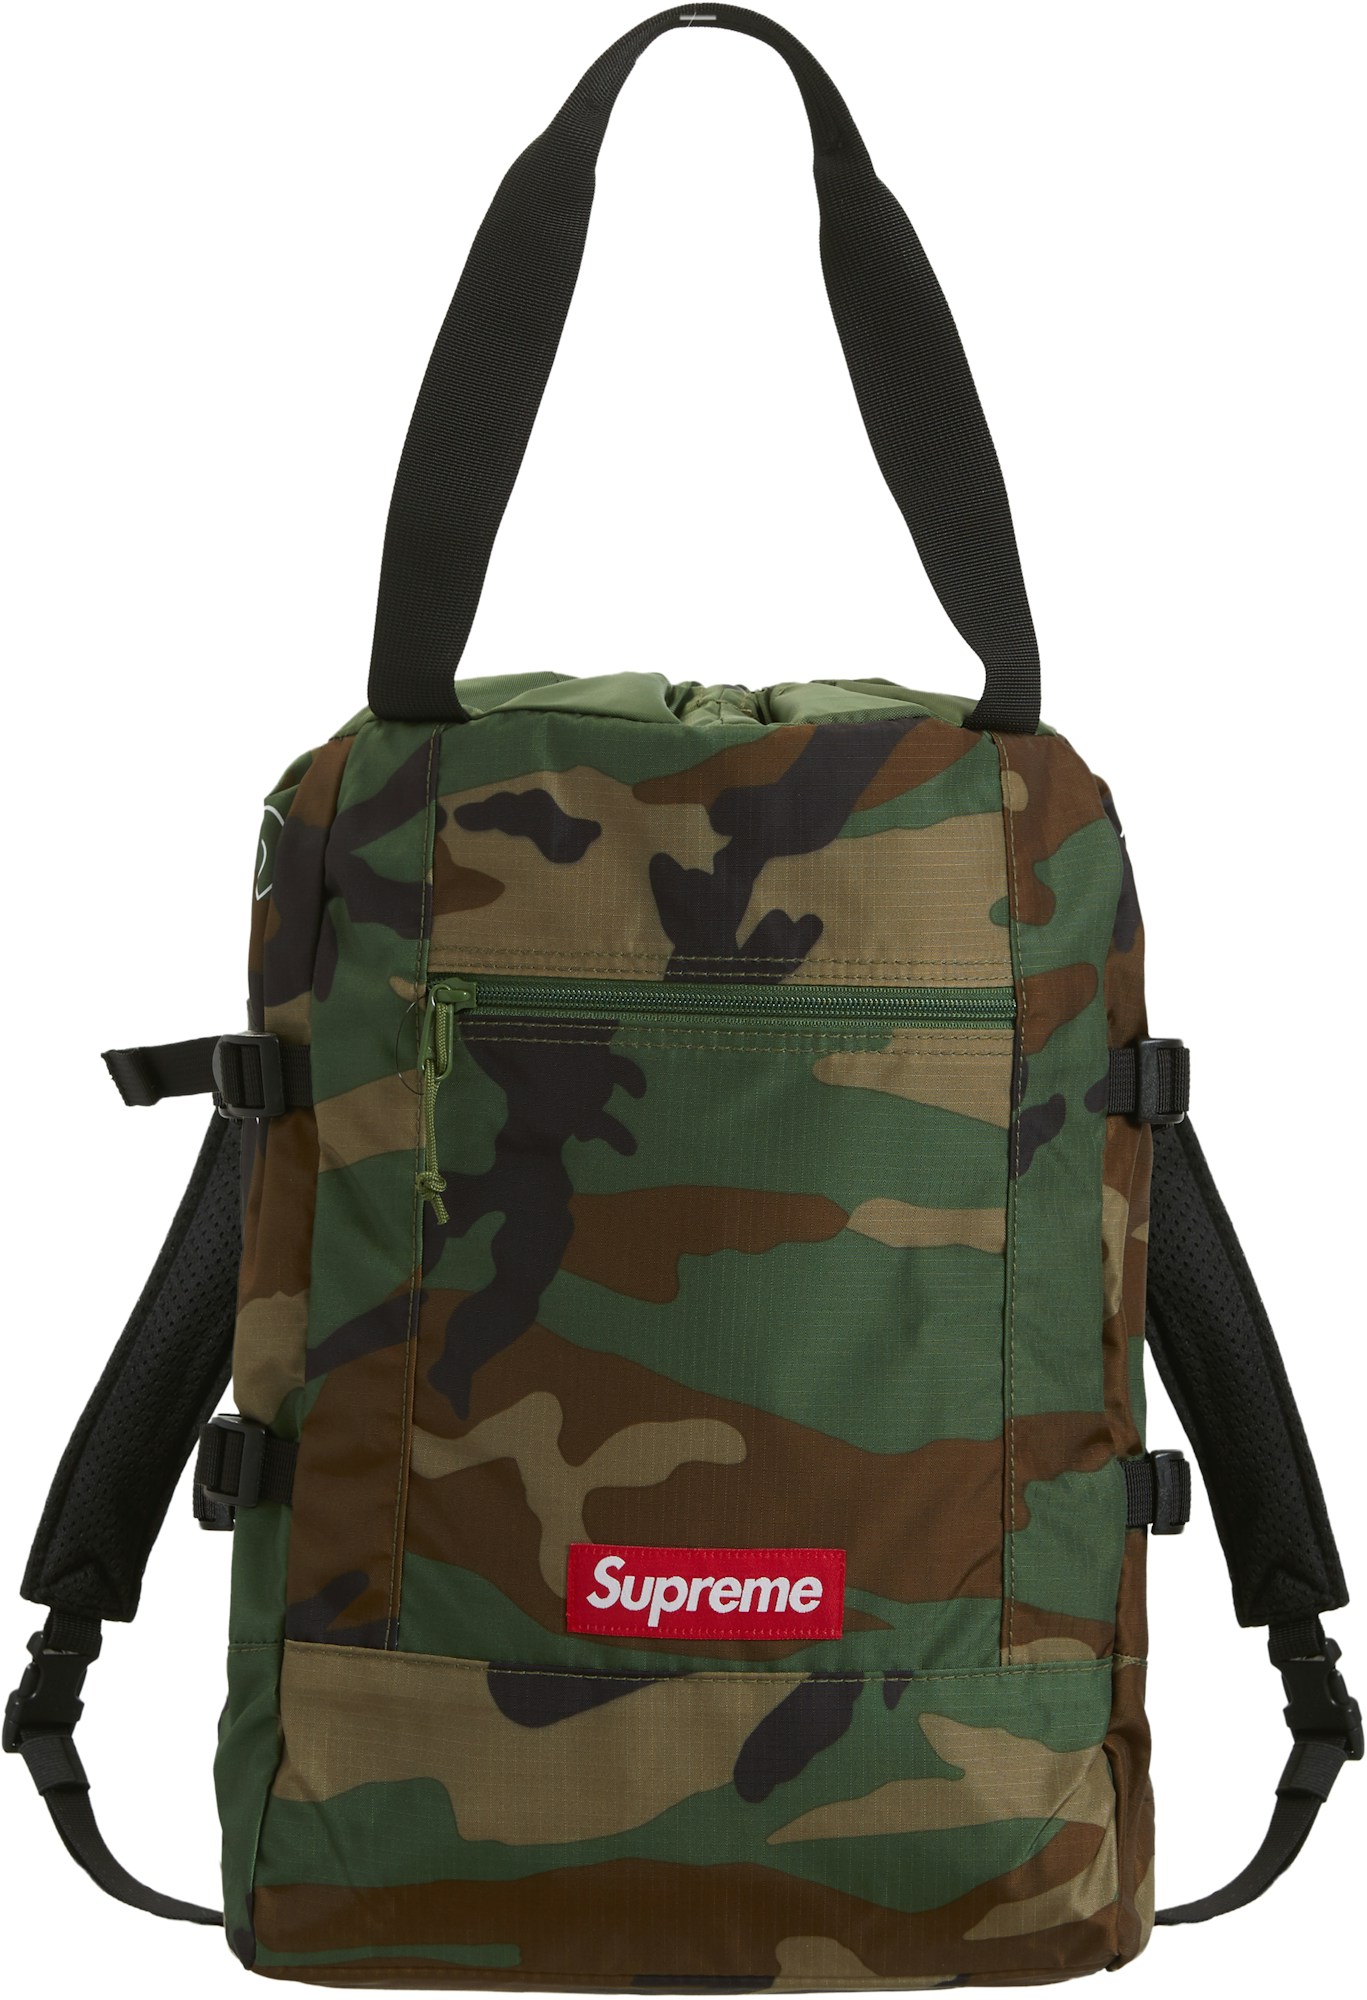 Supreme Tote Backpack Woodland Camo - SS19